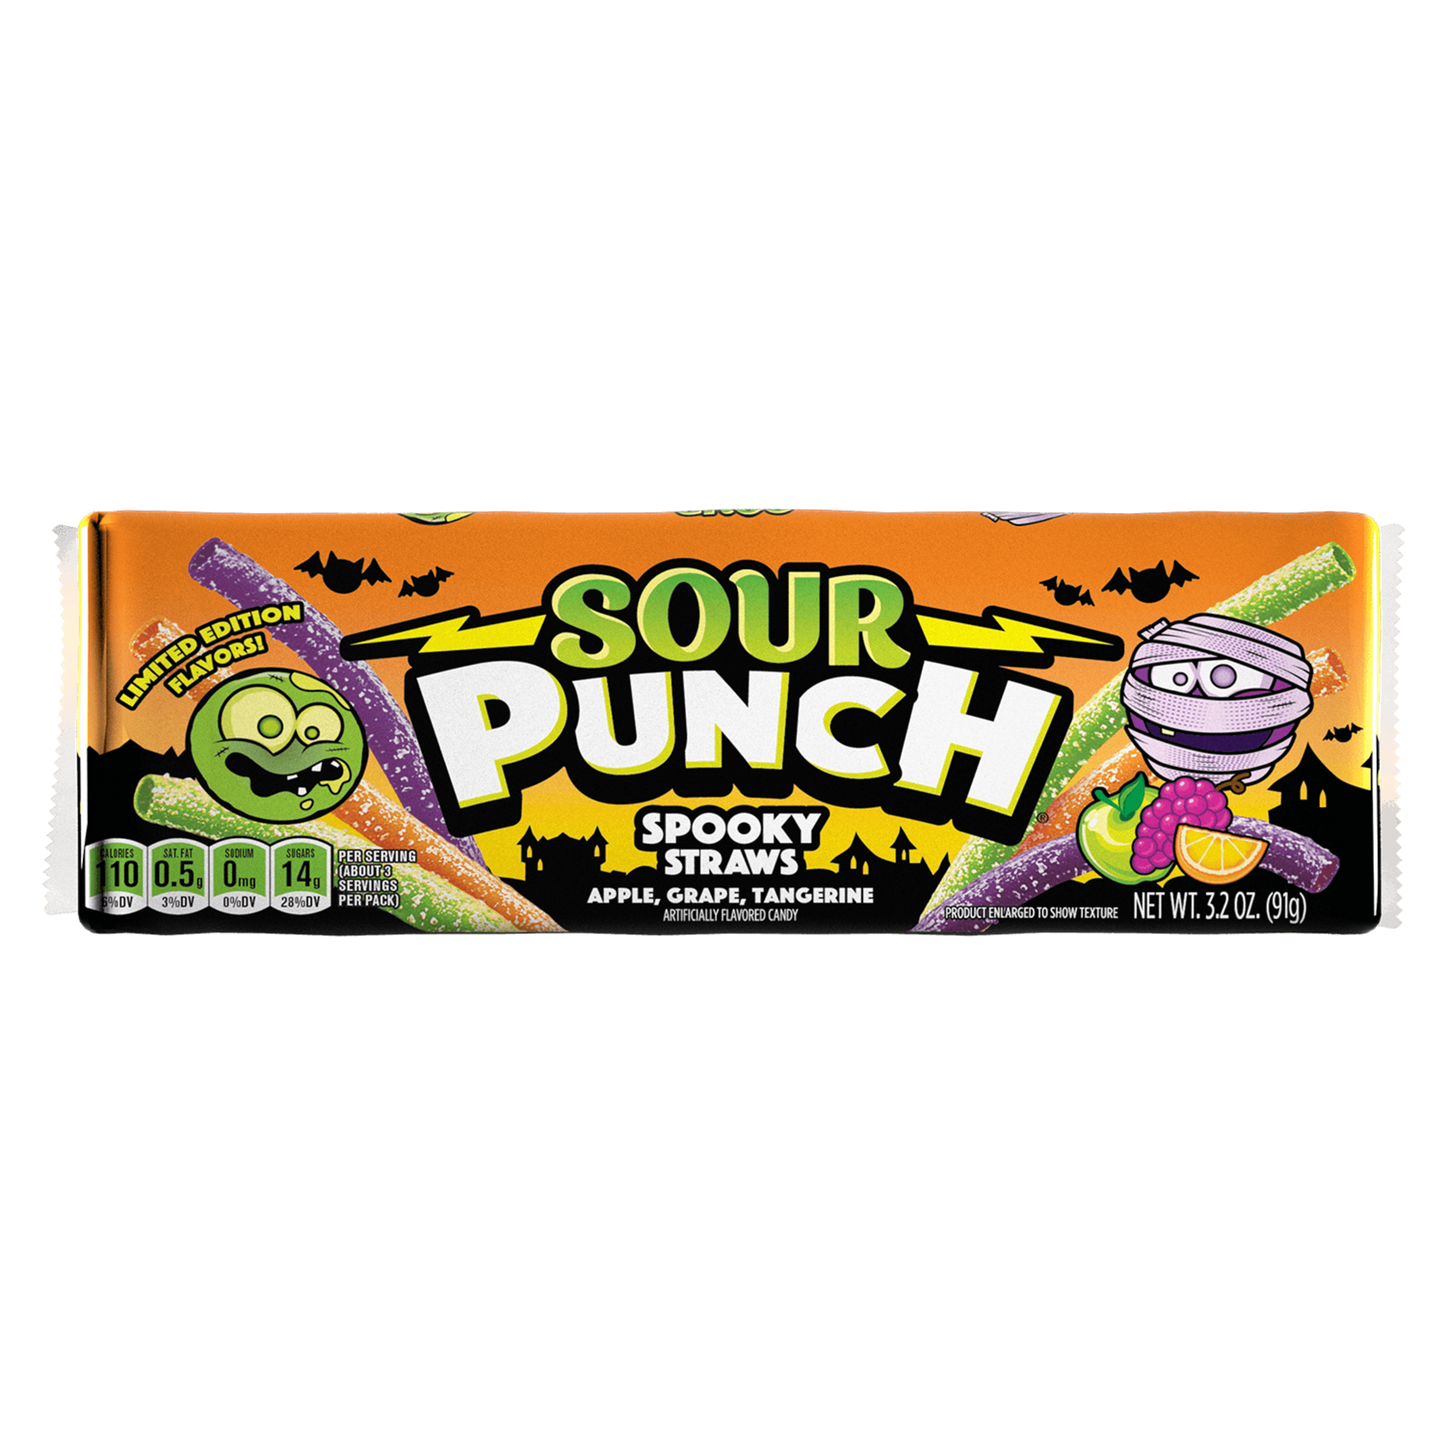 SOUR PUNCH Spooky Straws Halloween Candy - front of 3.2oz pack